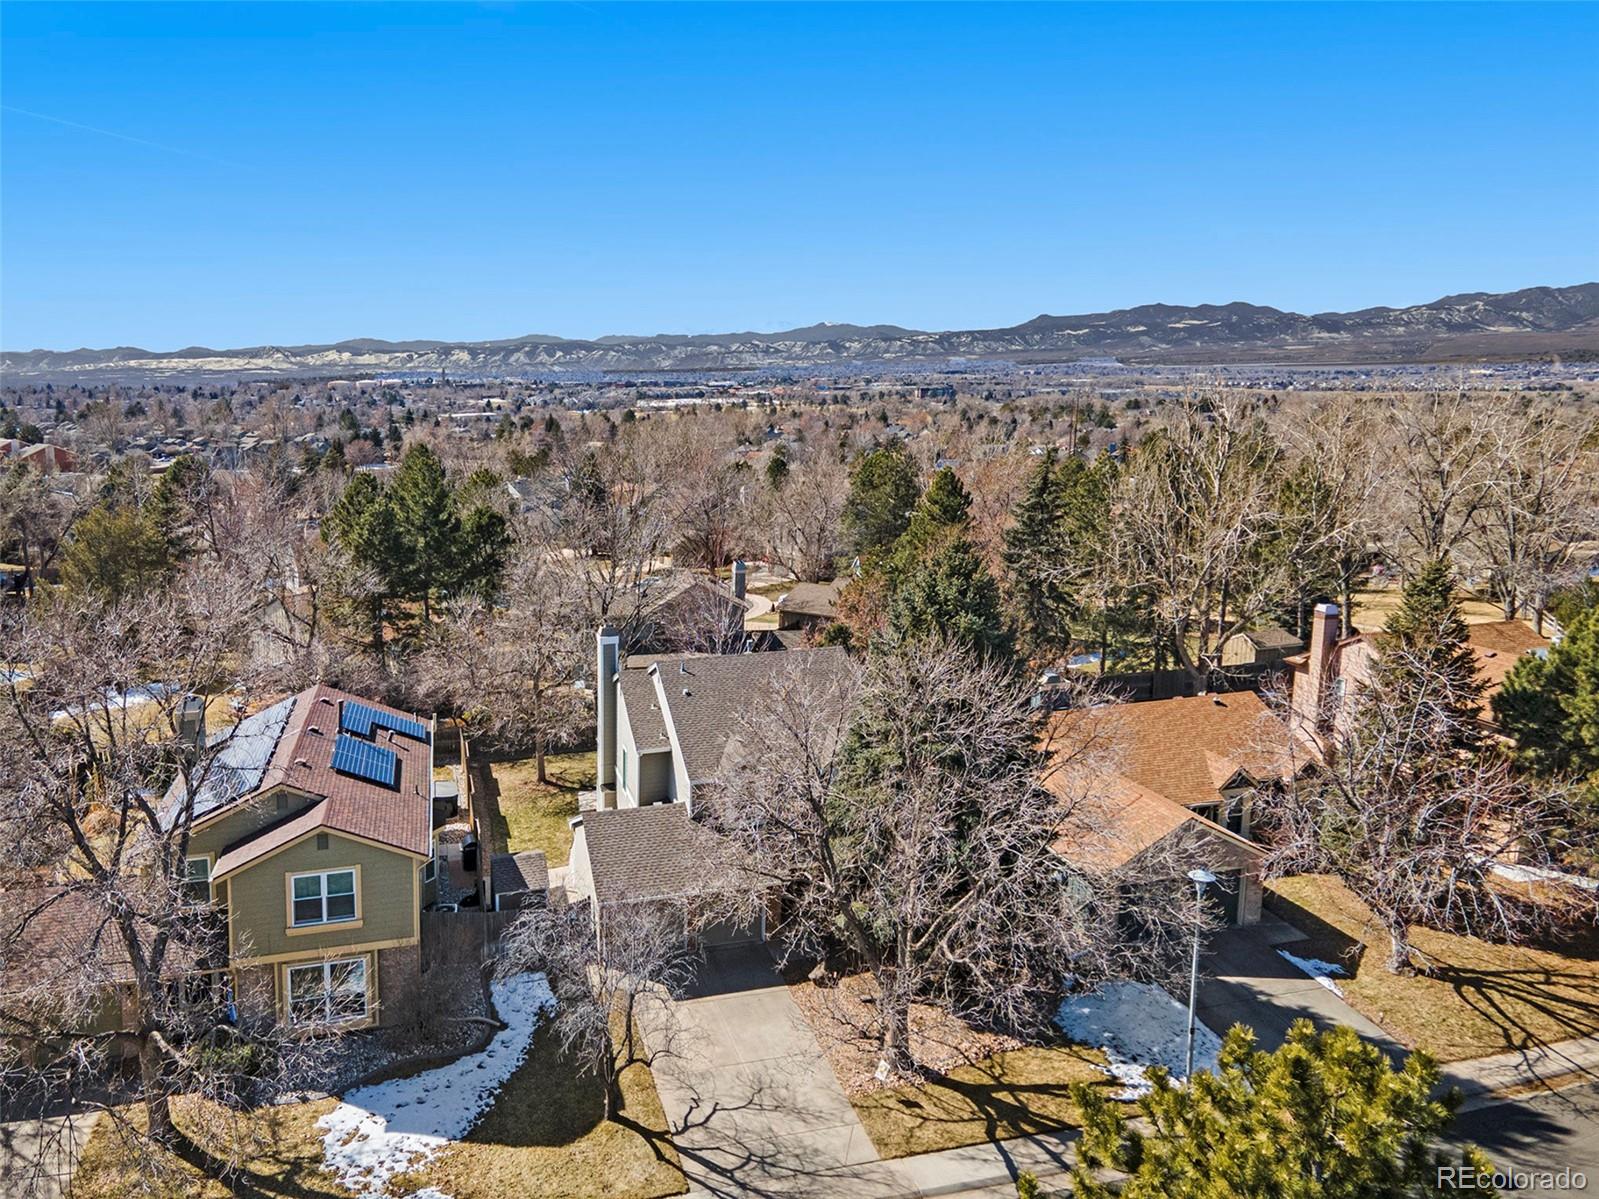 CMA Image for 3484 w 100th drive,Westminster, Colorado